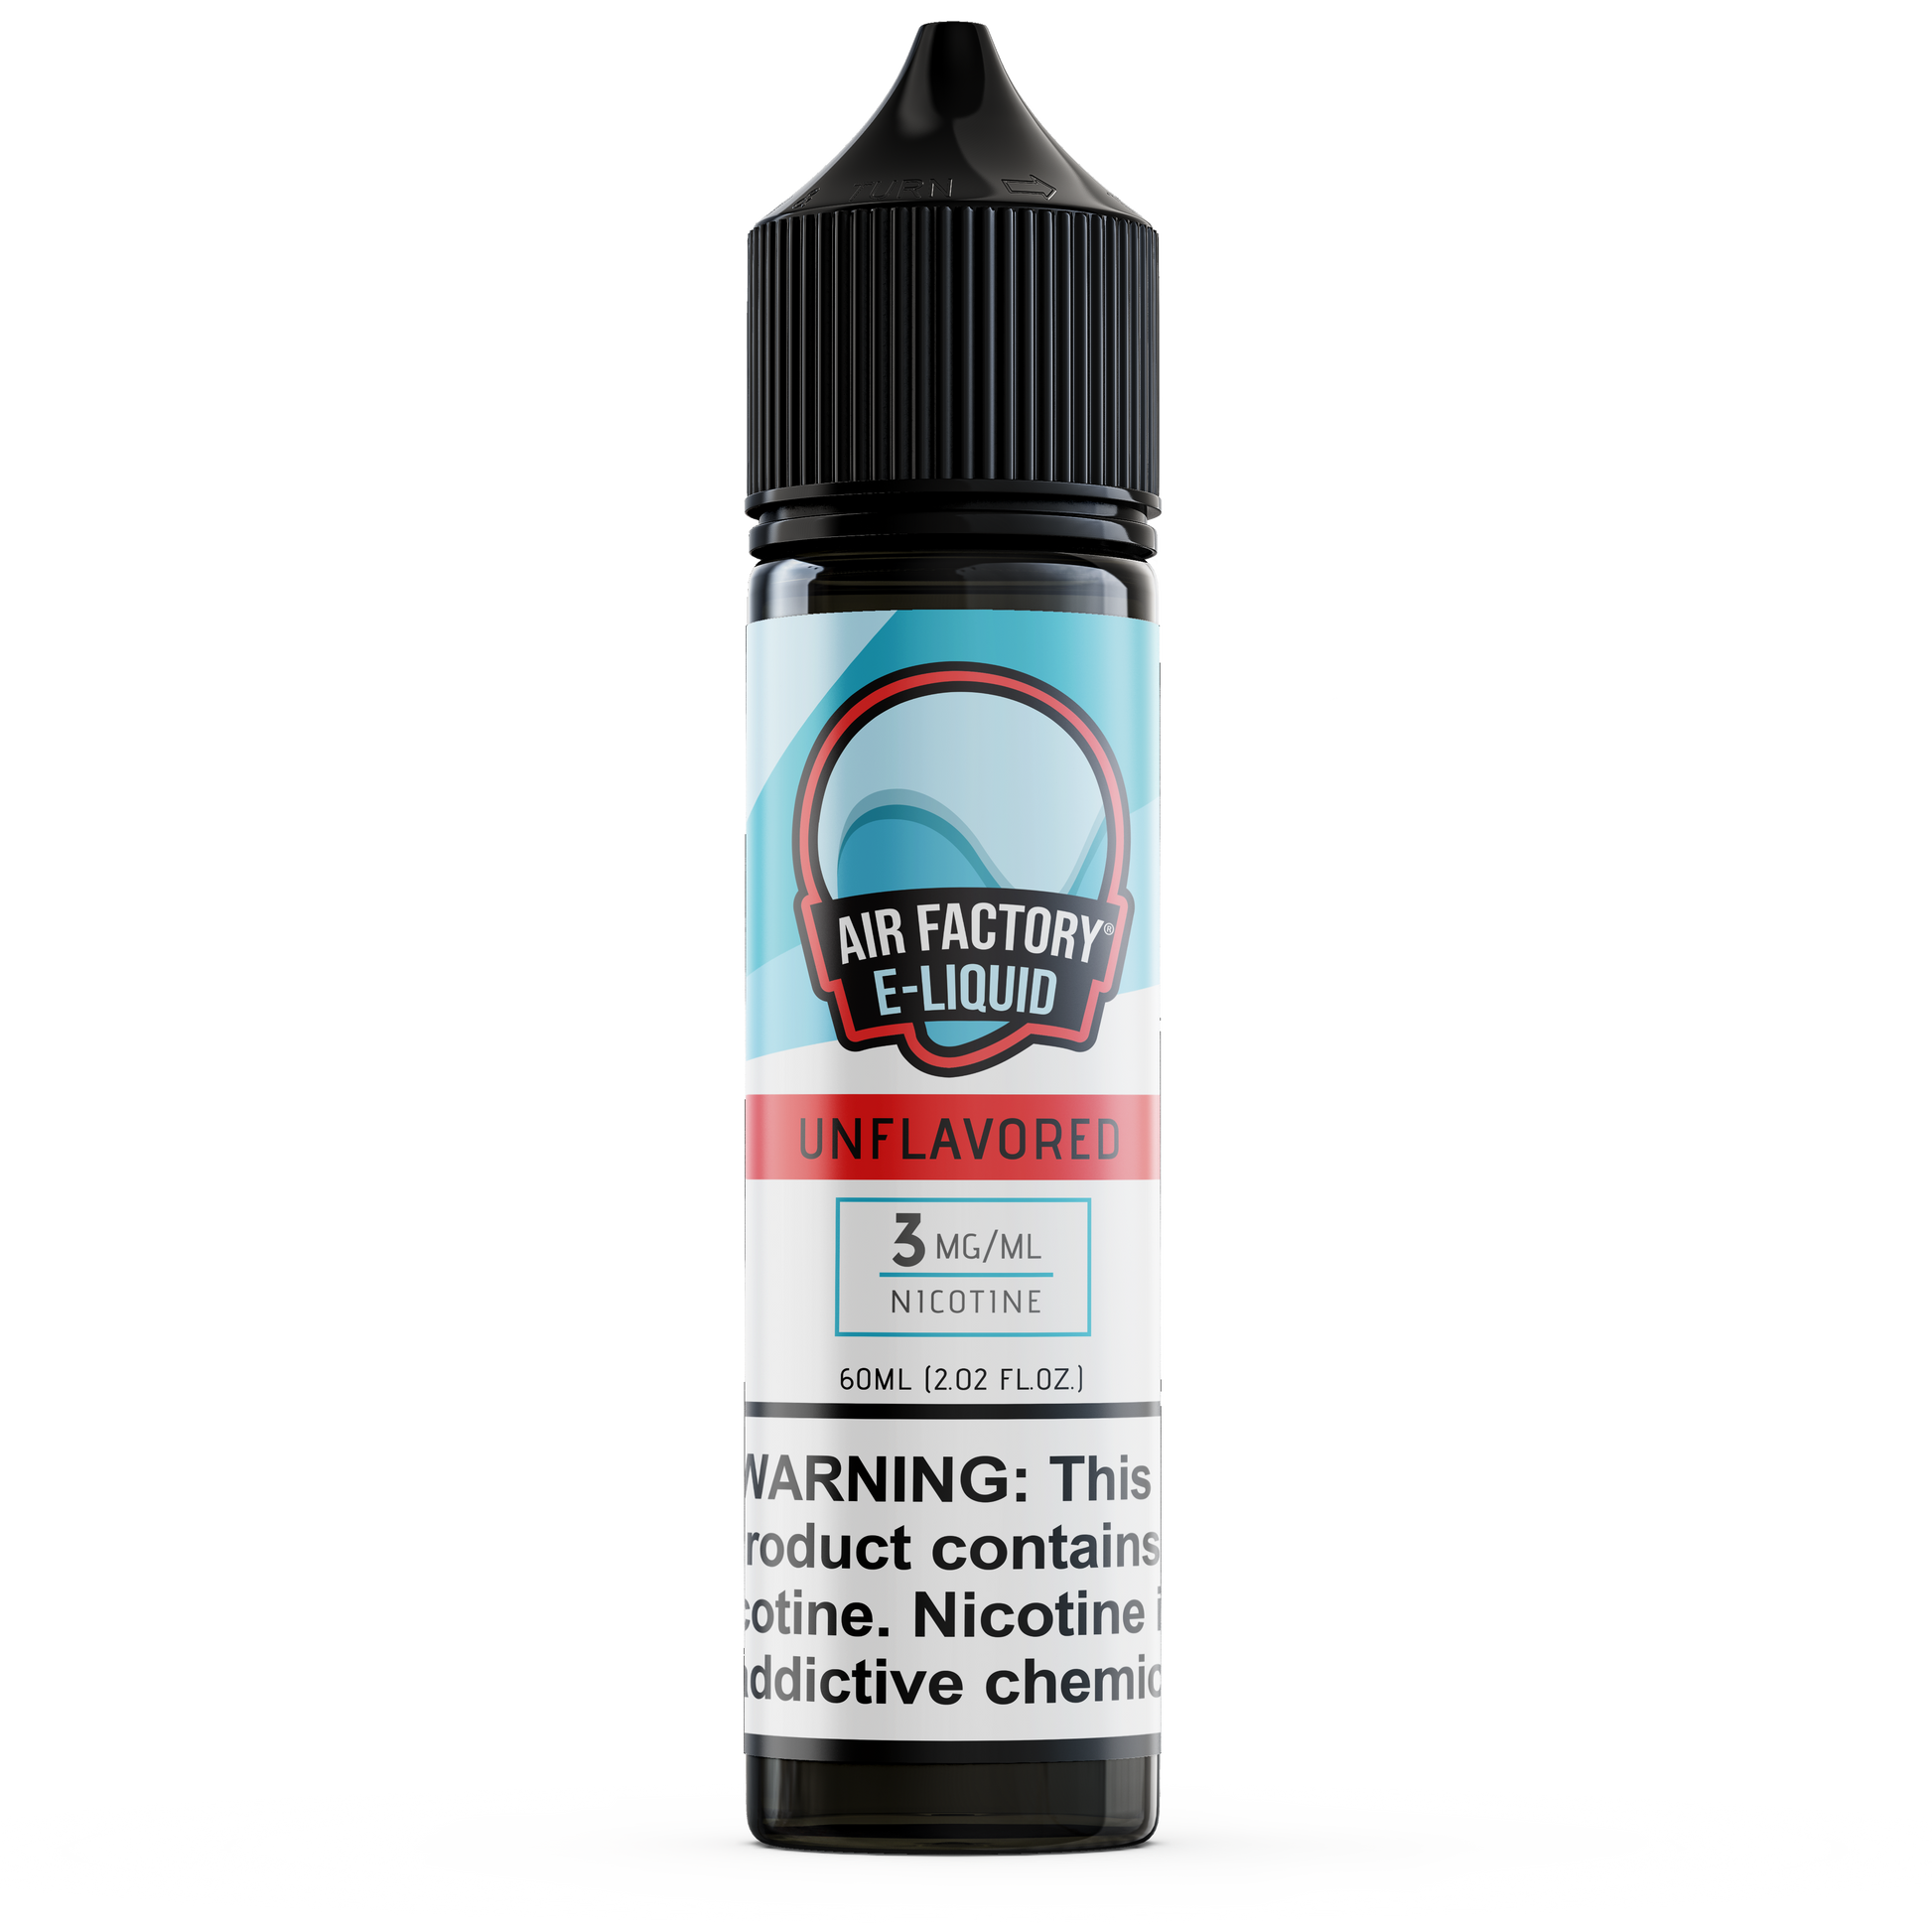 Unflavored by Air Factory E-Liquid 60ml bottle